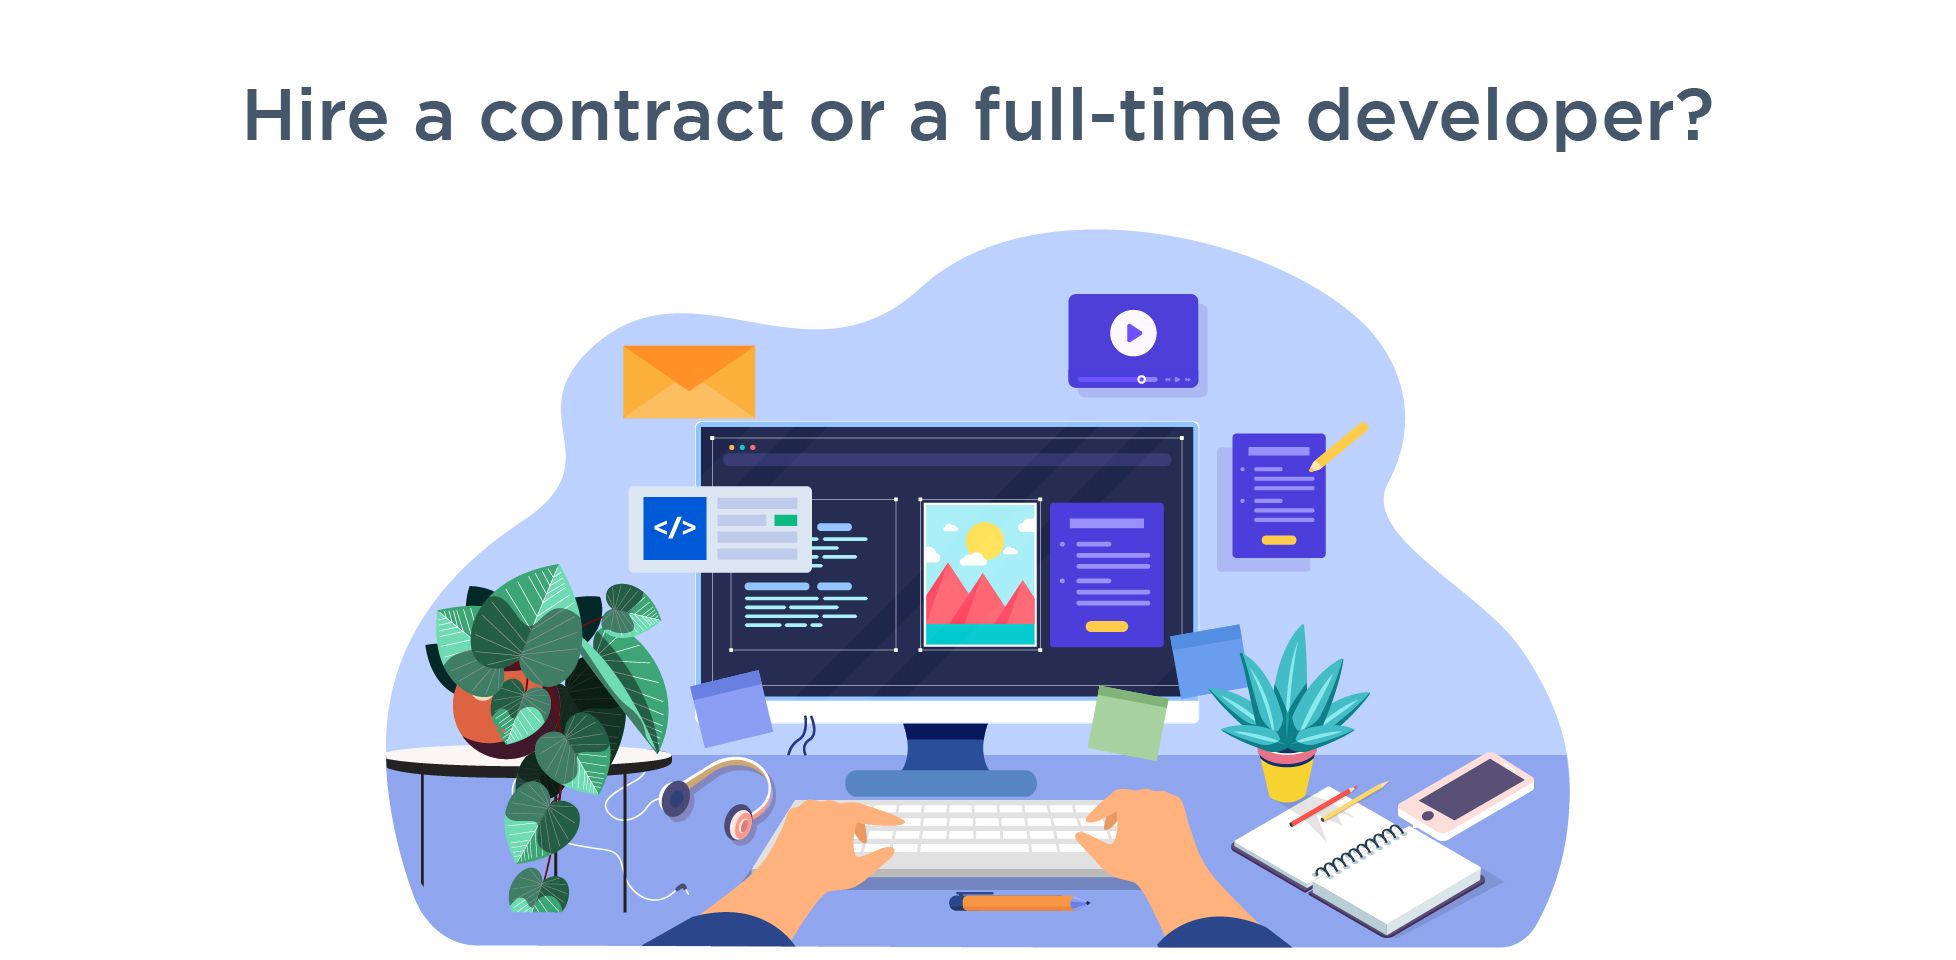 Should you hire a contract or a full-time developer?